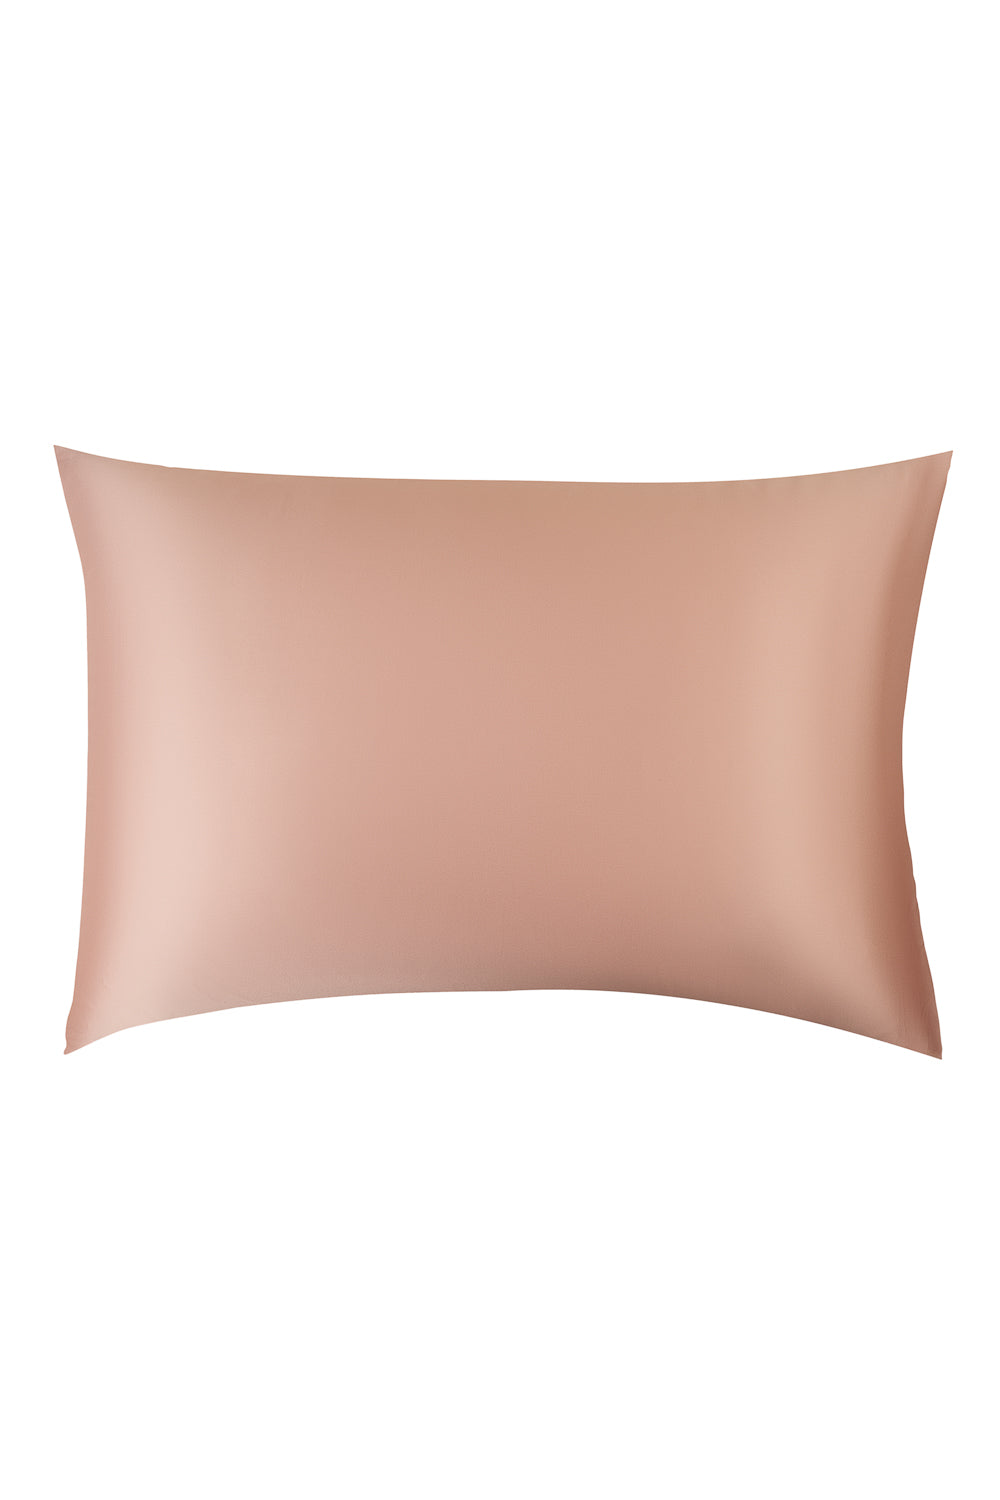 Silk Pillow Case in Shell Pink